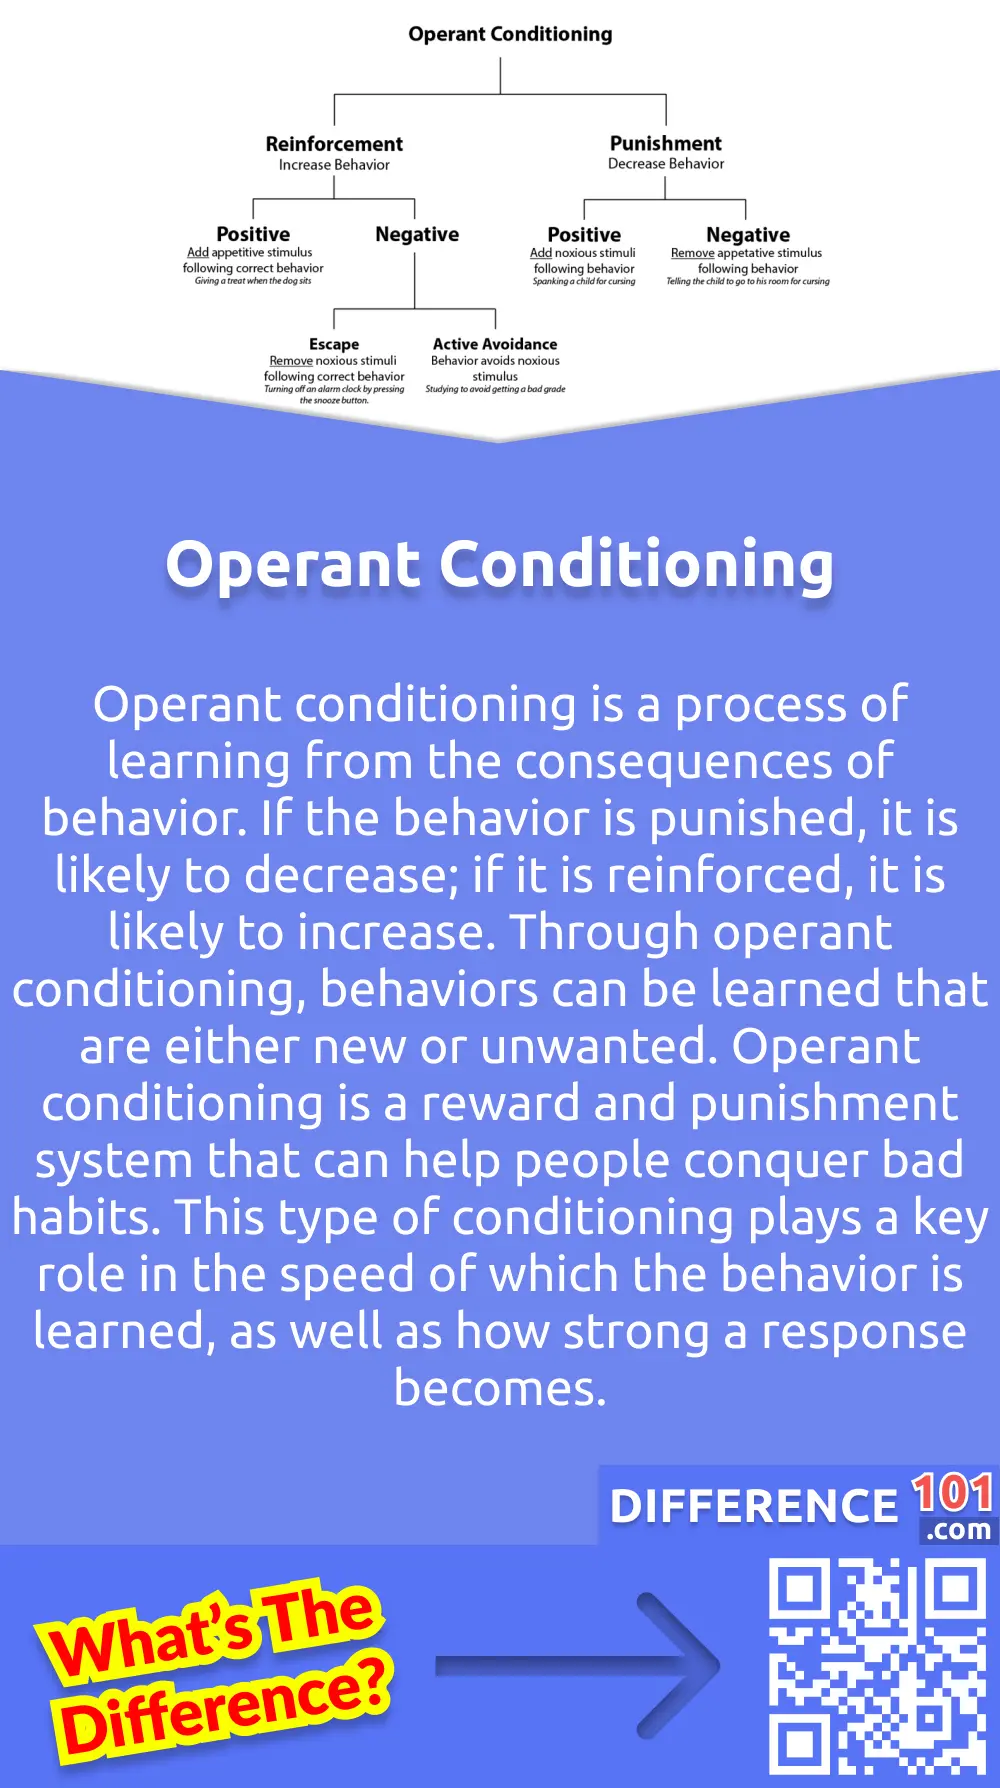 classical and operant conditioning